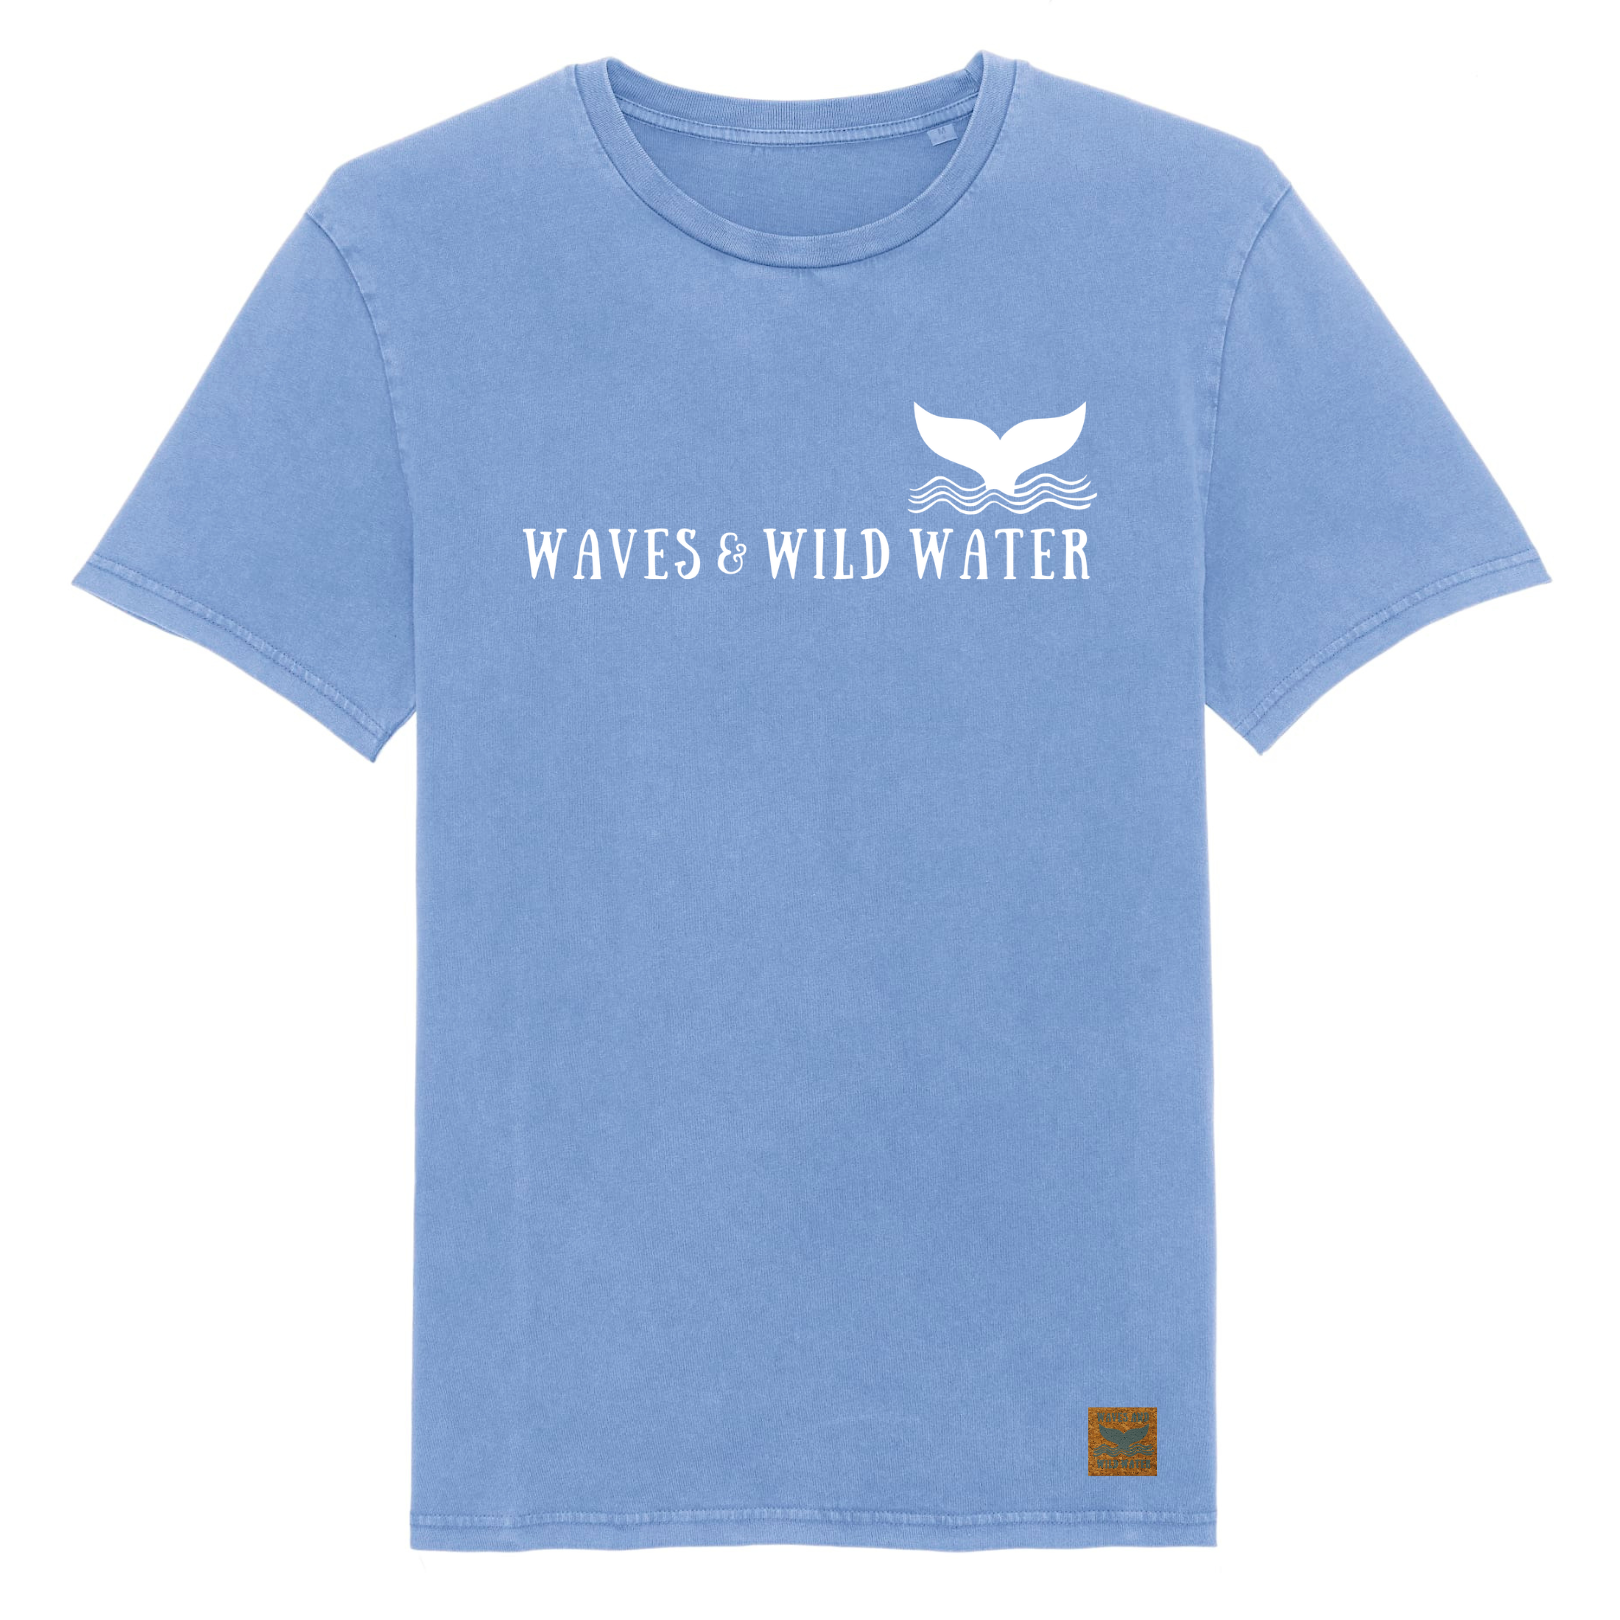 A blue t-shirt with Waves & Wild Water logo printed across the front in white ink.